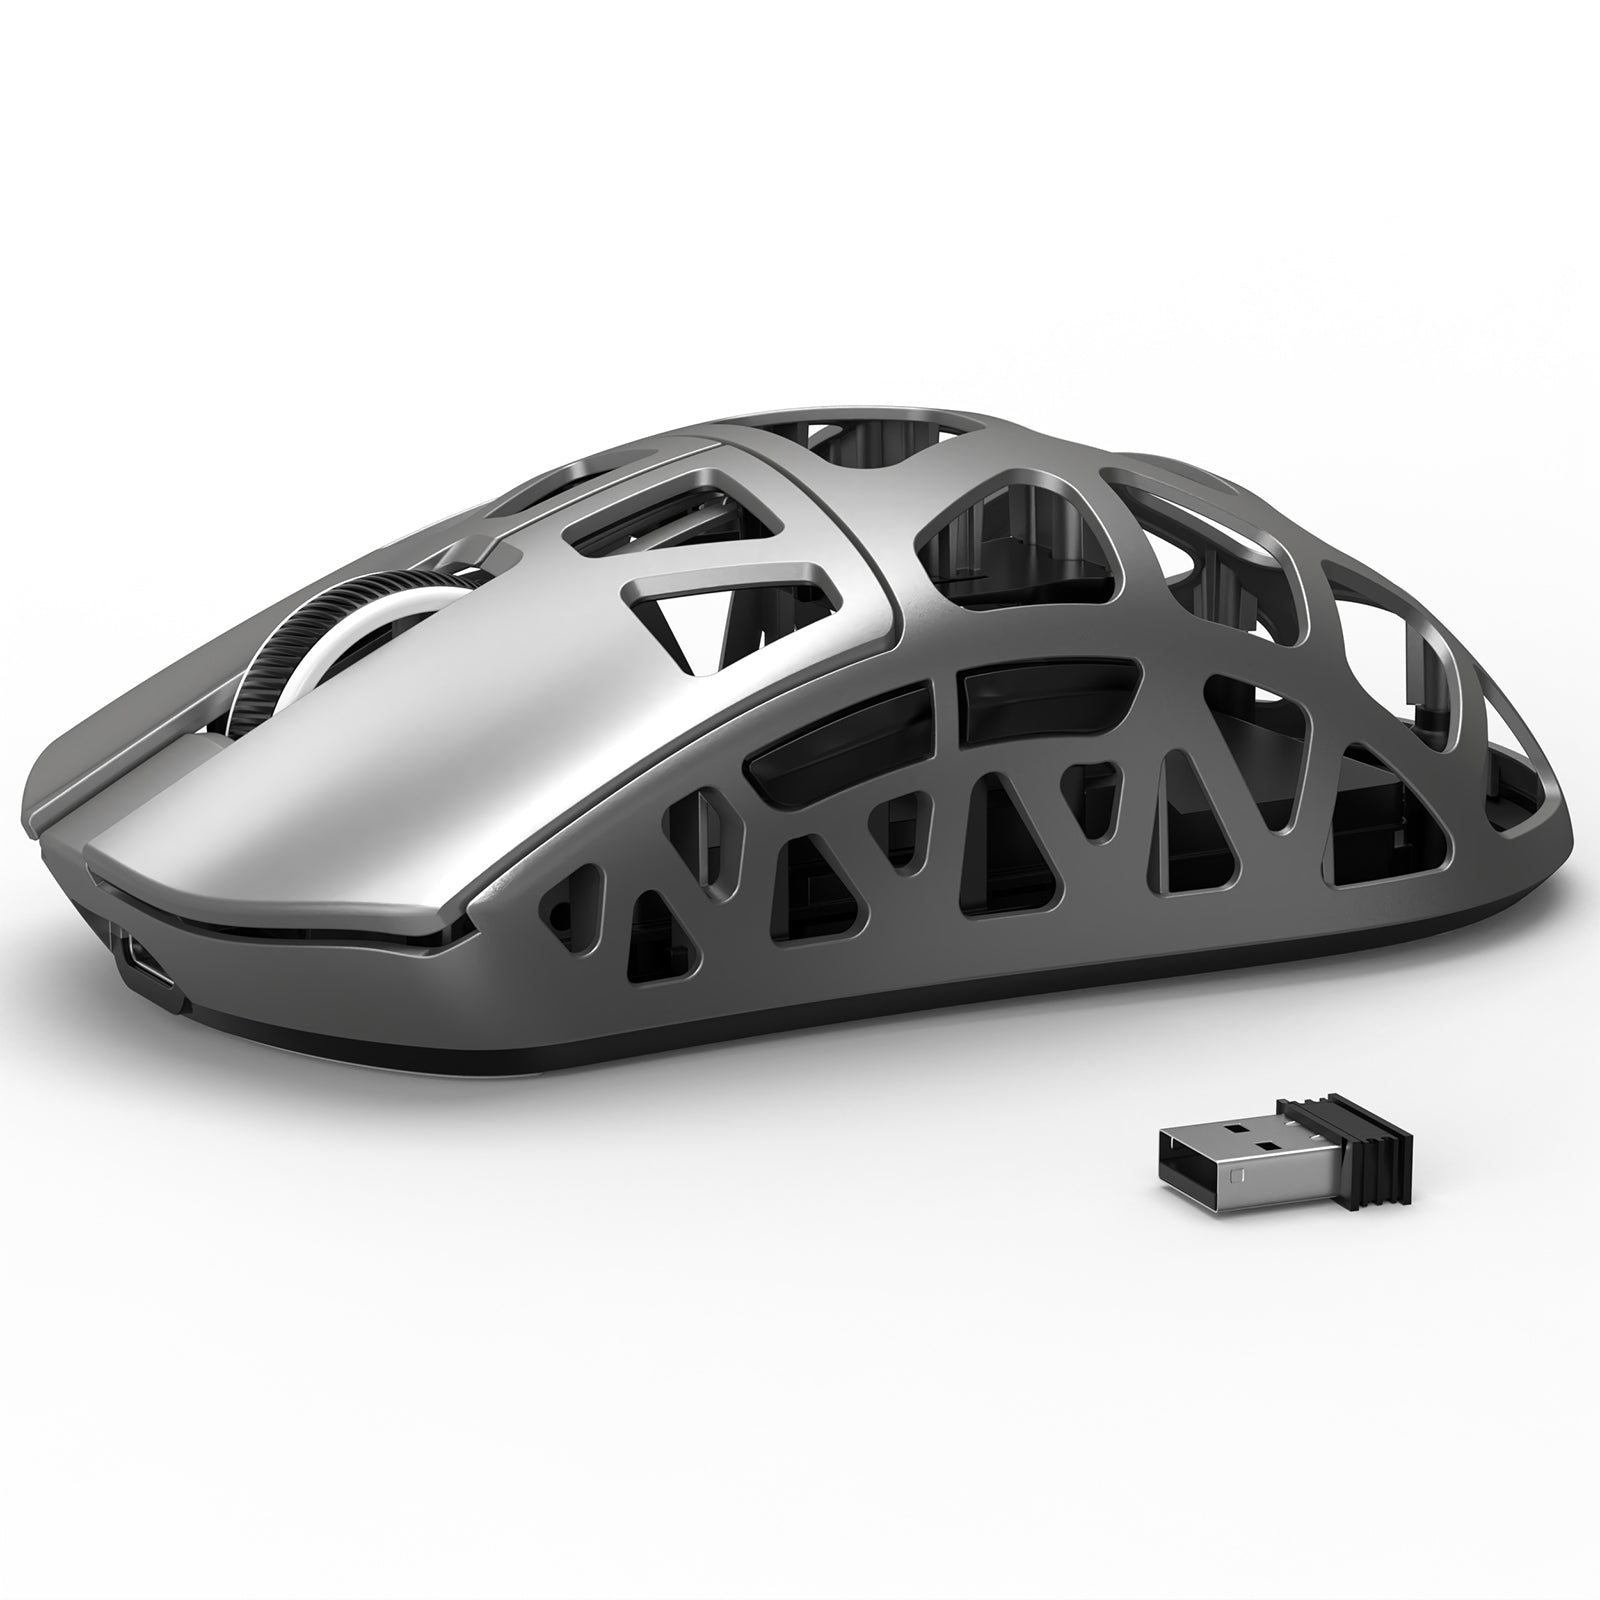 ATTACK SHARK R3 Magnesium Alloy Gaming Mouse 8K